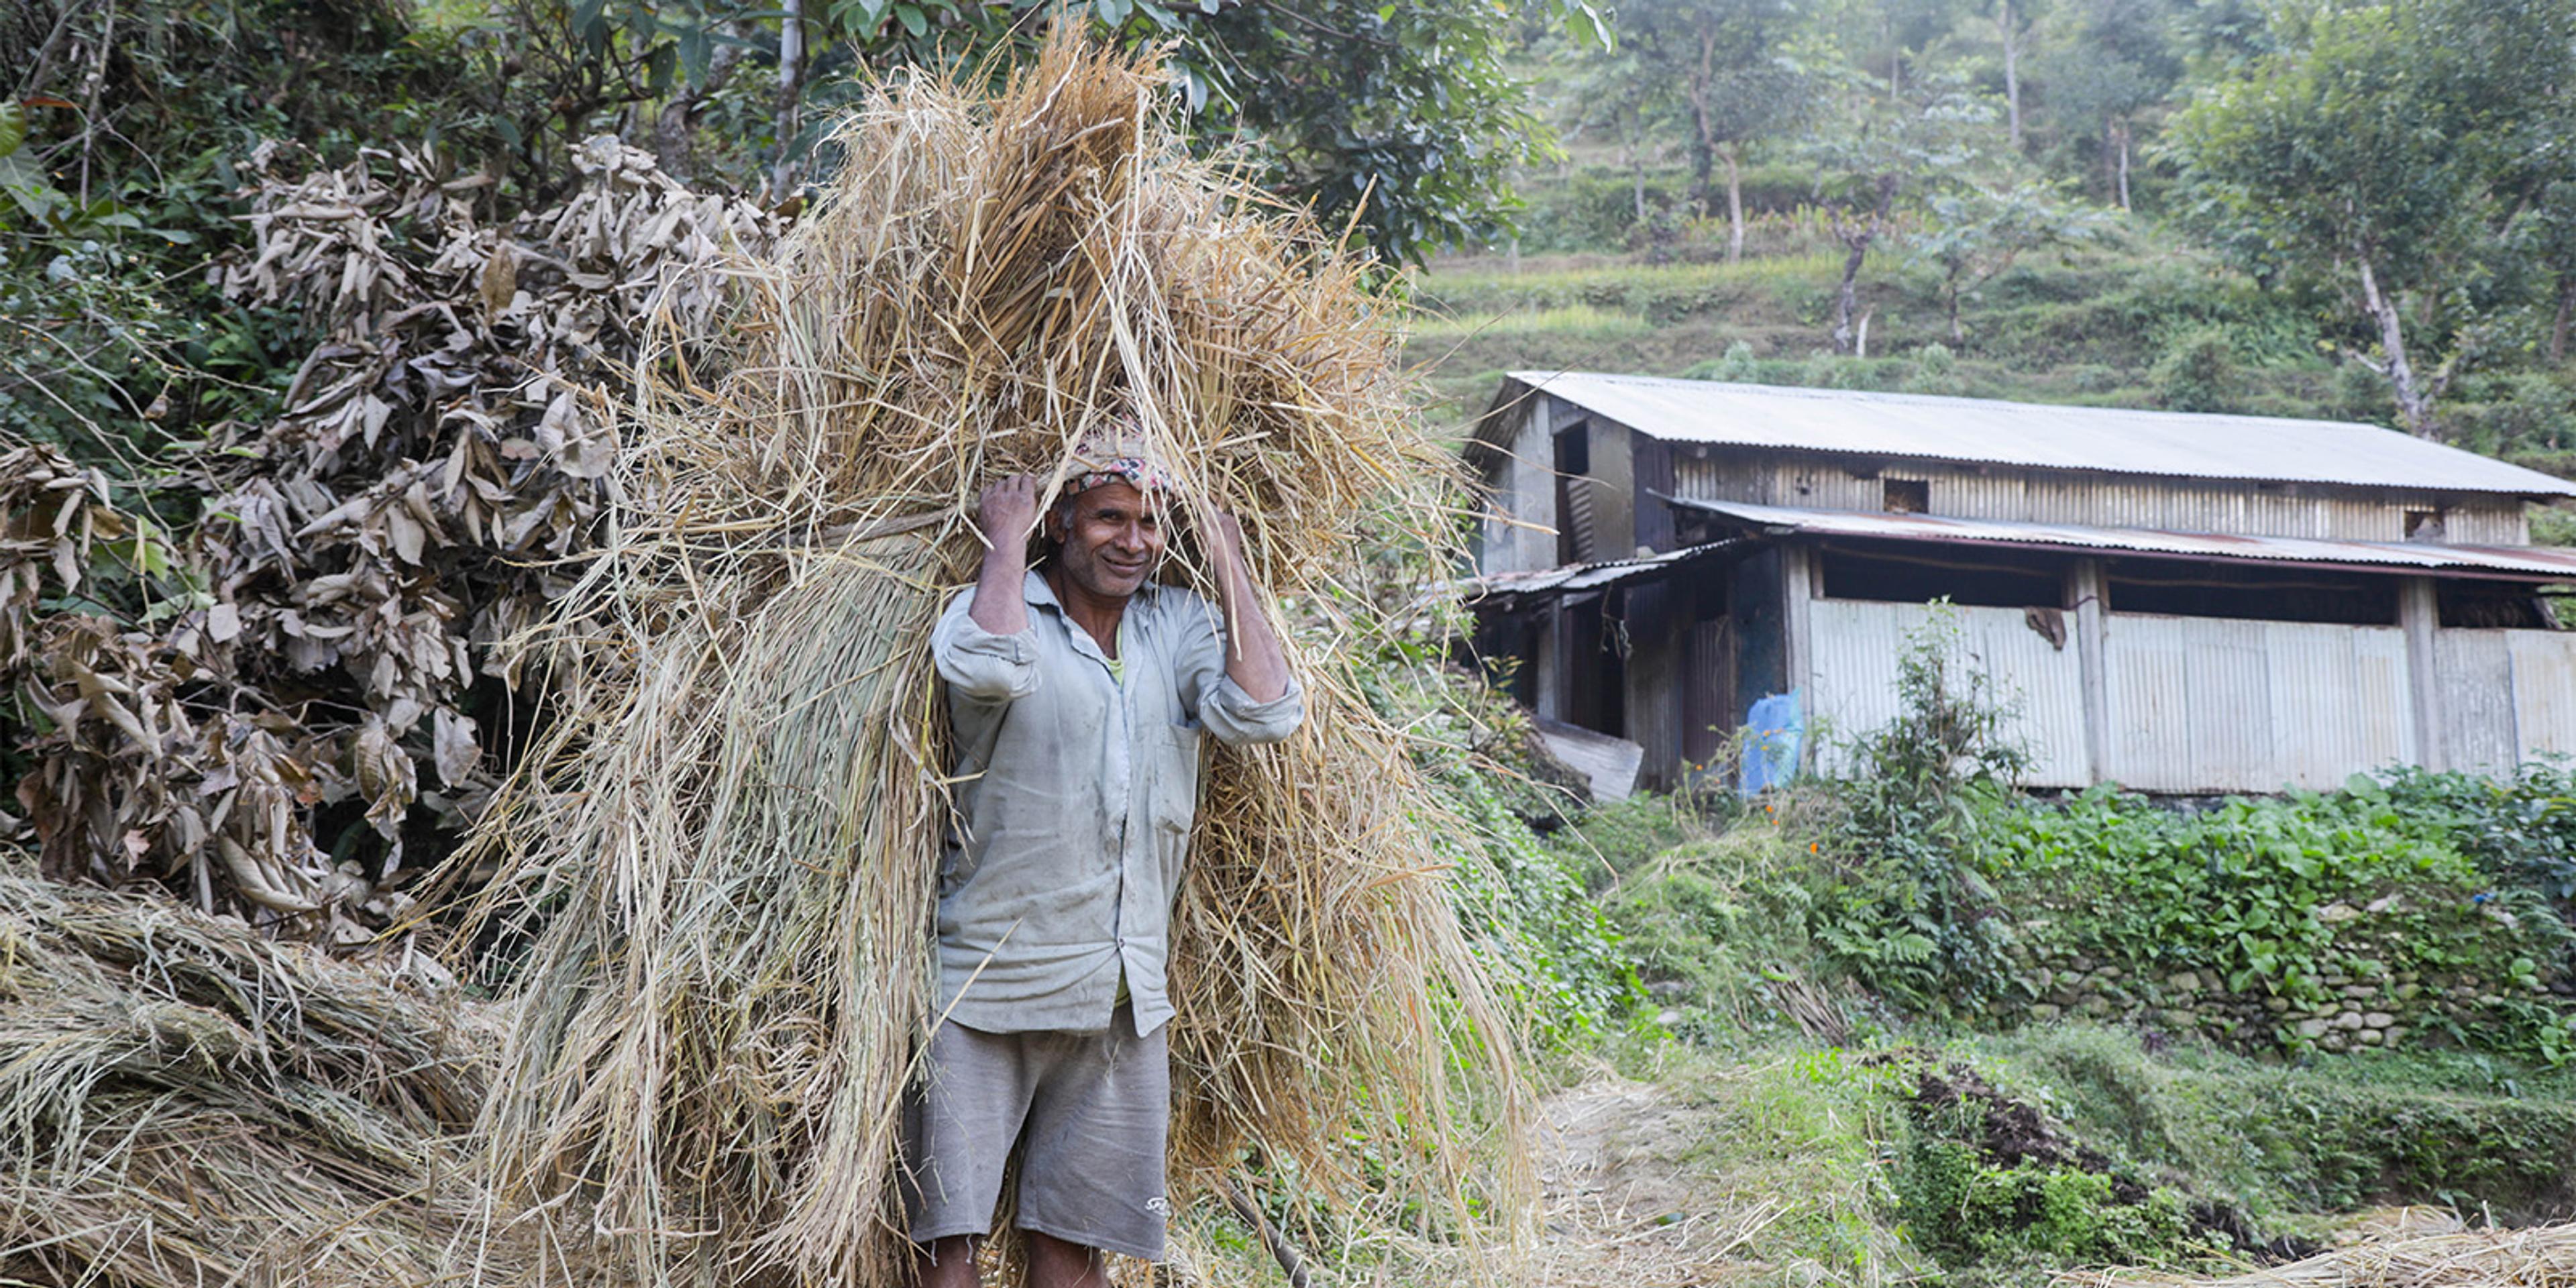 A man carries rice straw on his back.